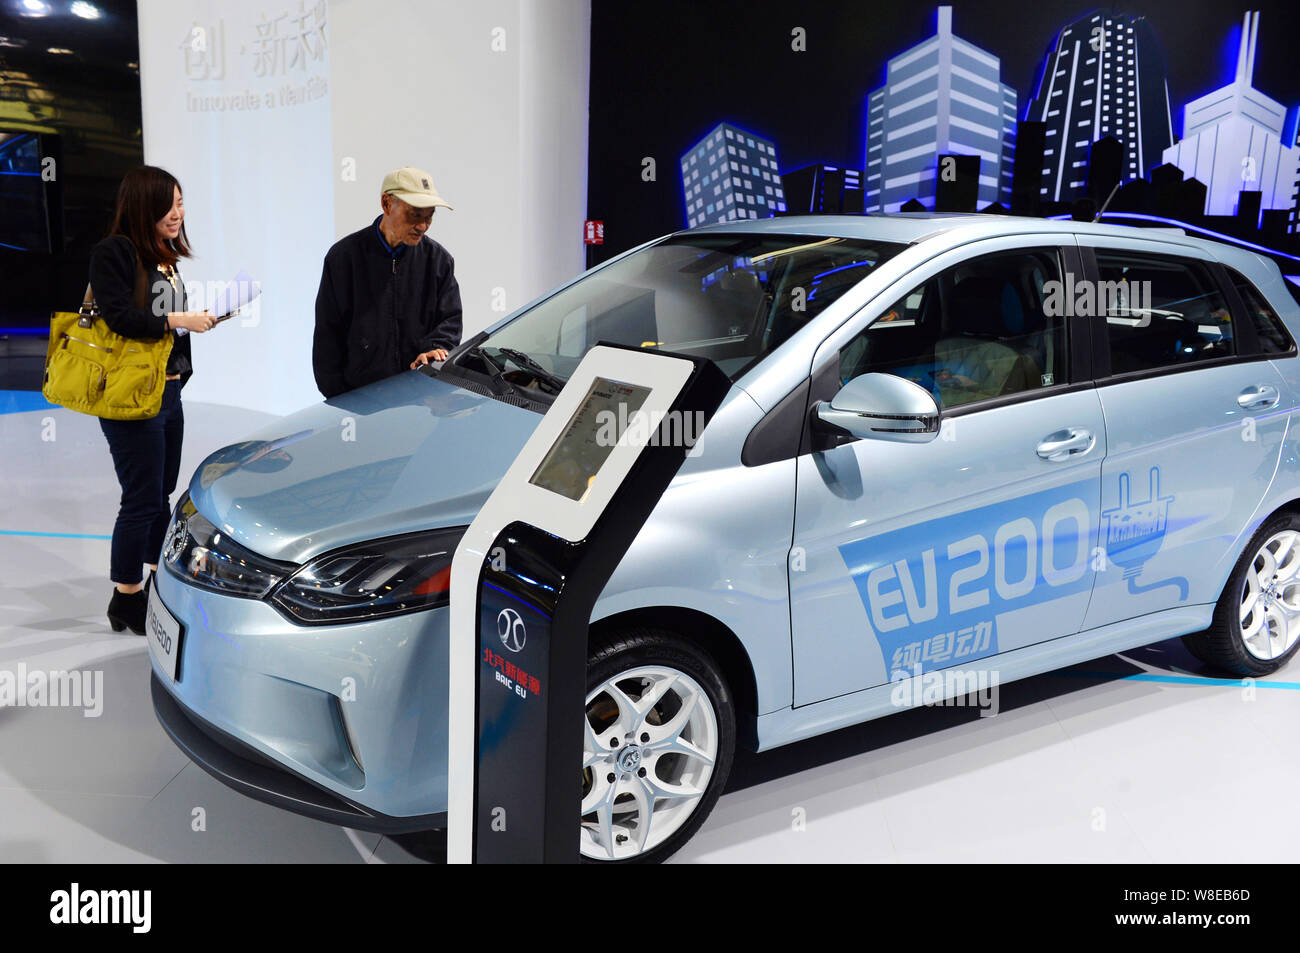 --FILE--Visitors look at an EV200 electric car of BAIC during an expo in Beijing, China, 13 May 2015.  China will soon approve production licenses for Stock Photo